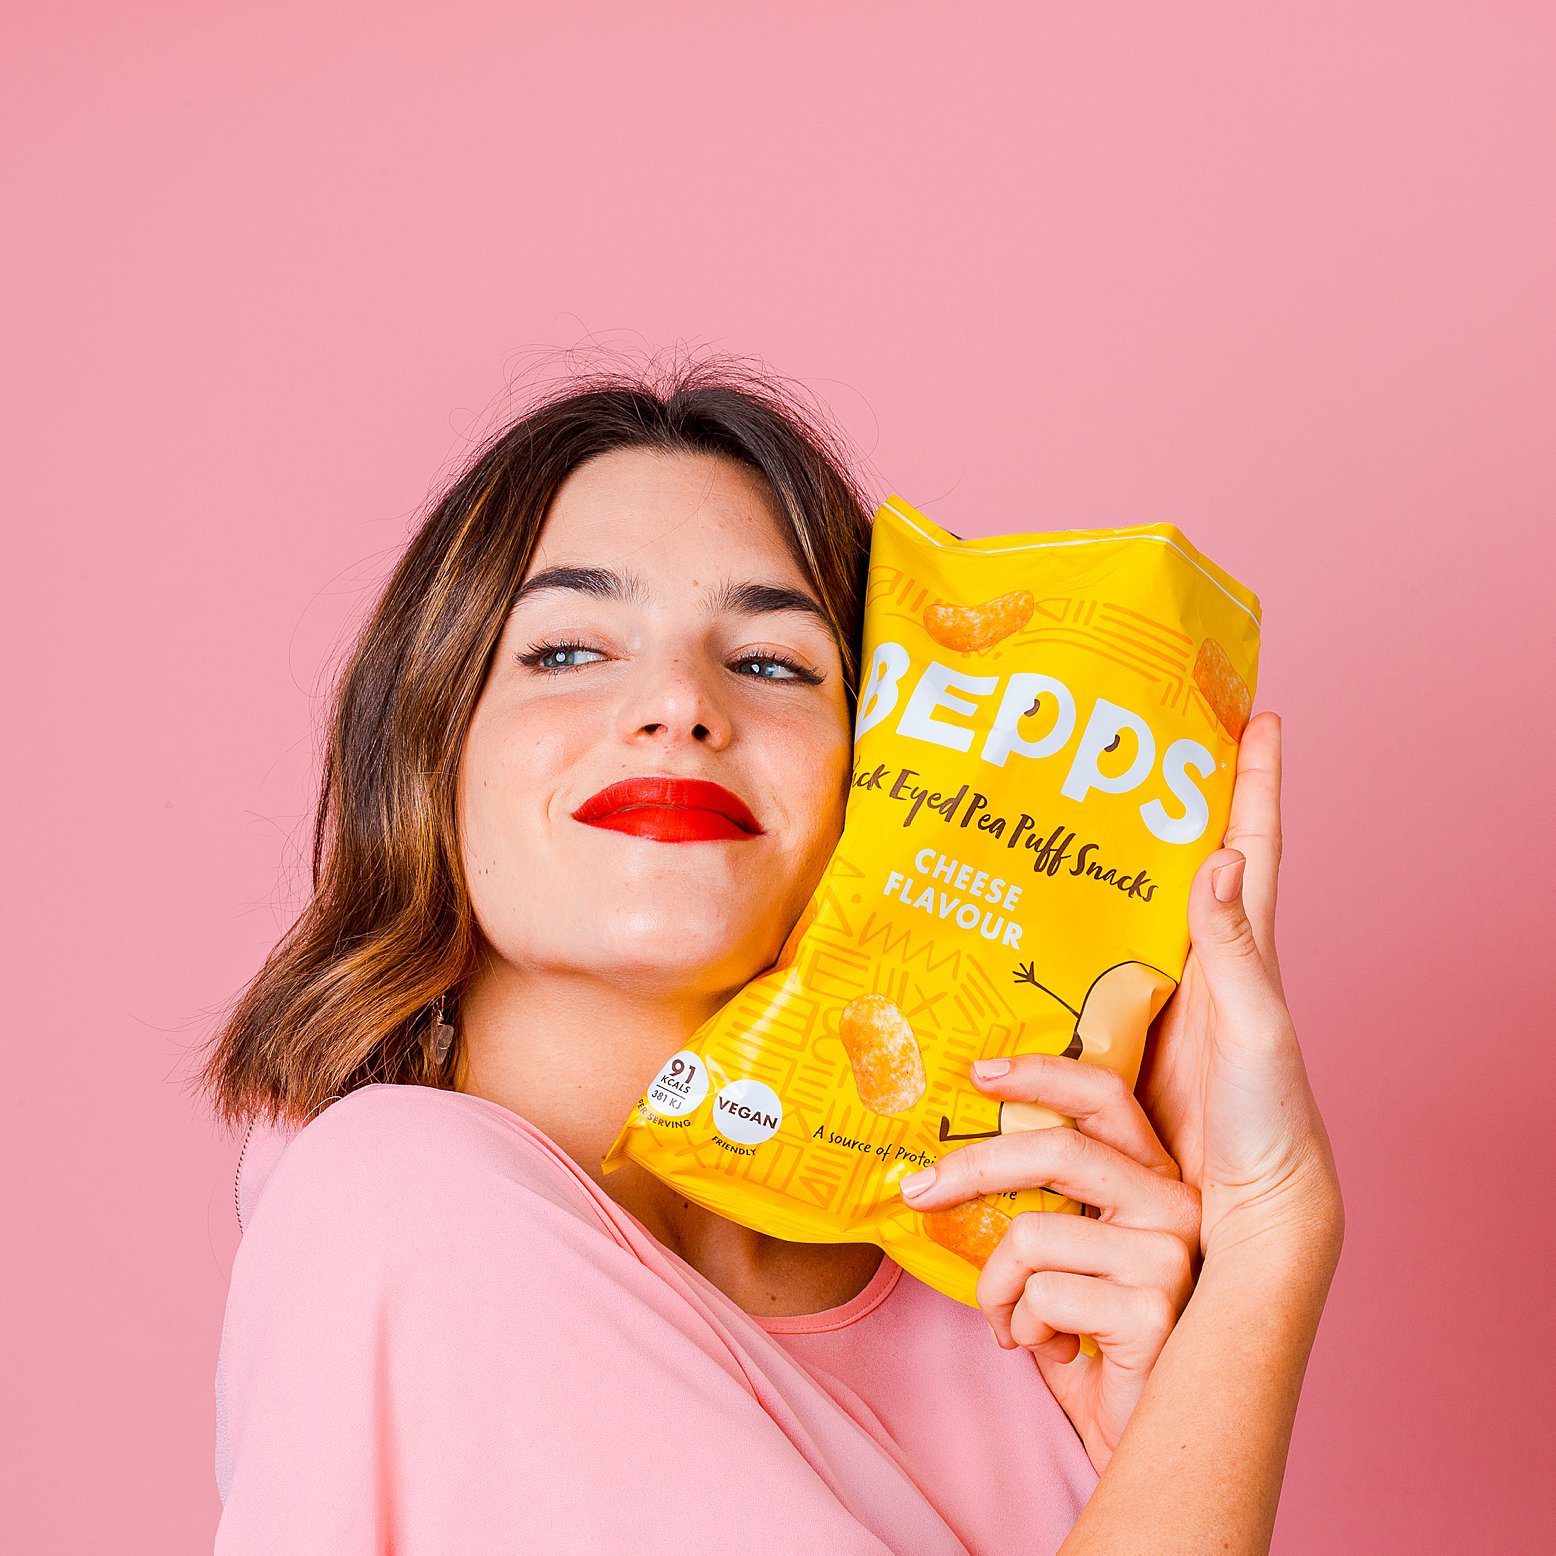 Product photography & content creation for Bepps Snacks. Product photography & styling by Marianne Taylor.